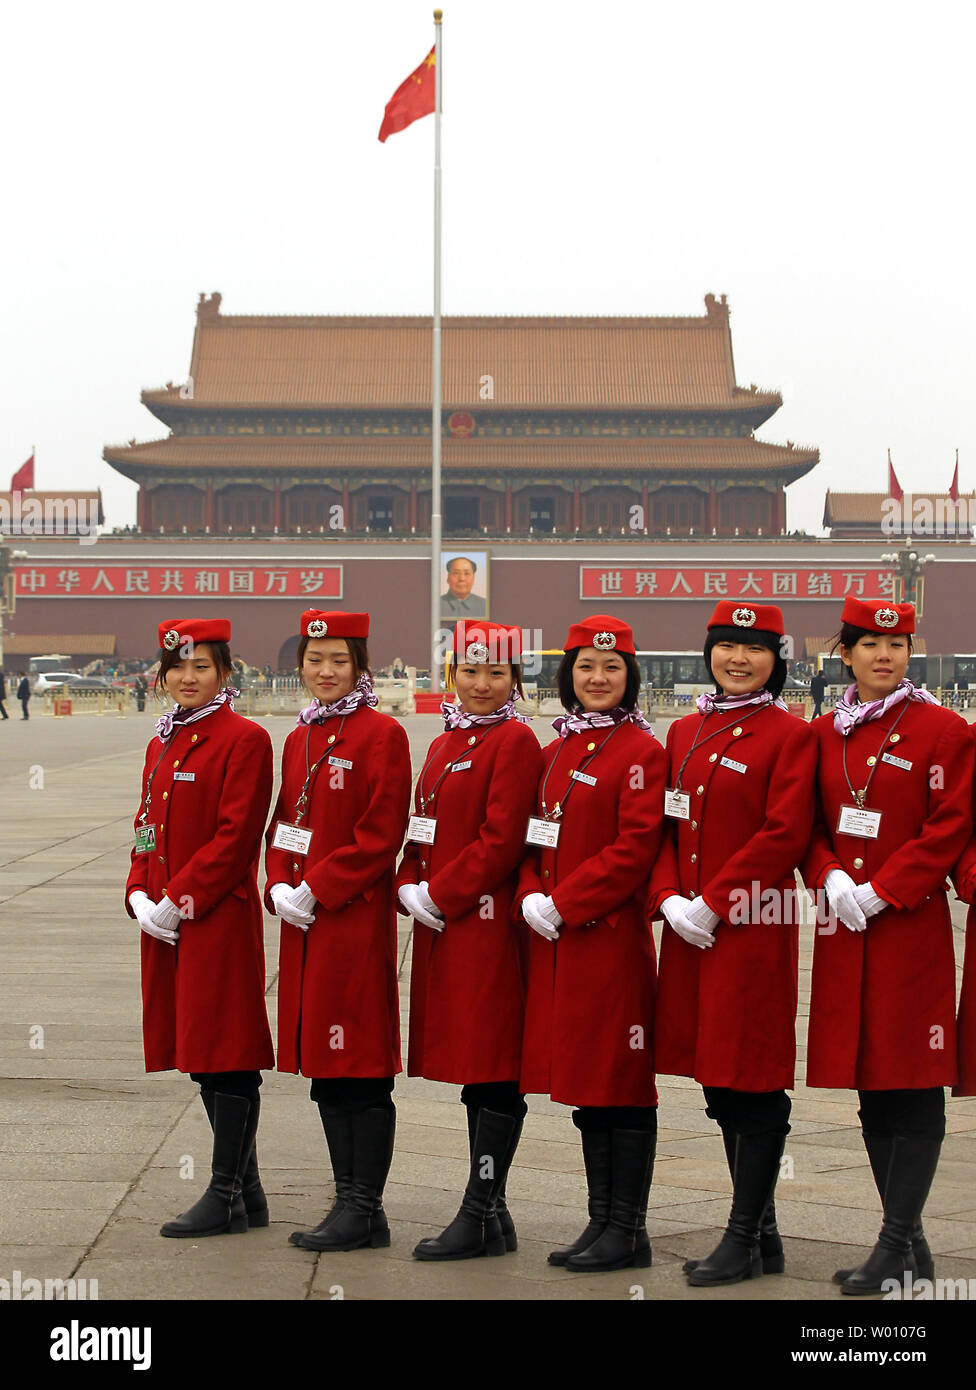 Chinese hostesses pose for a photo on Tiananmen Square ahead of the opening ceremony of the annual Chinese People's Political Consultative Conference (CPPCC) in Beijing March 3, 2012.  China's leaders face a parliament meeting next week likely to bring into focus a deepening worry that they have squandered their chance for reform because of fears of instability ahead of the upcoming change in leadership.     UPI/Stephen Shaver Stock Photo